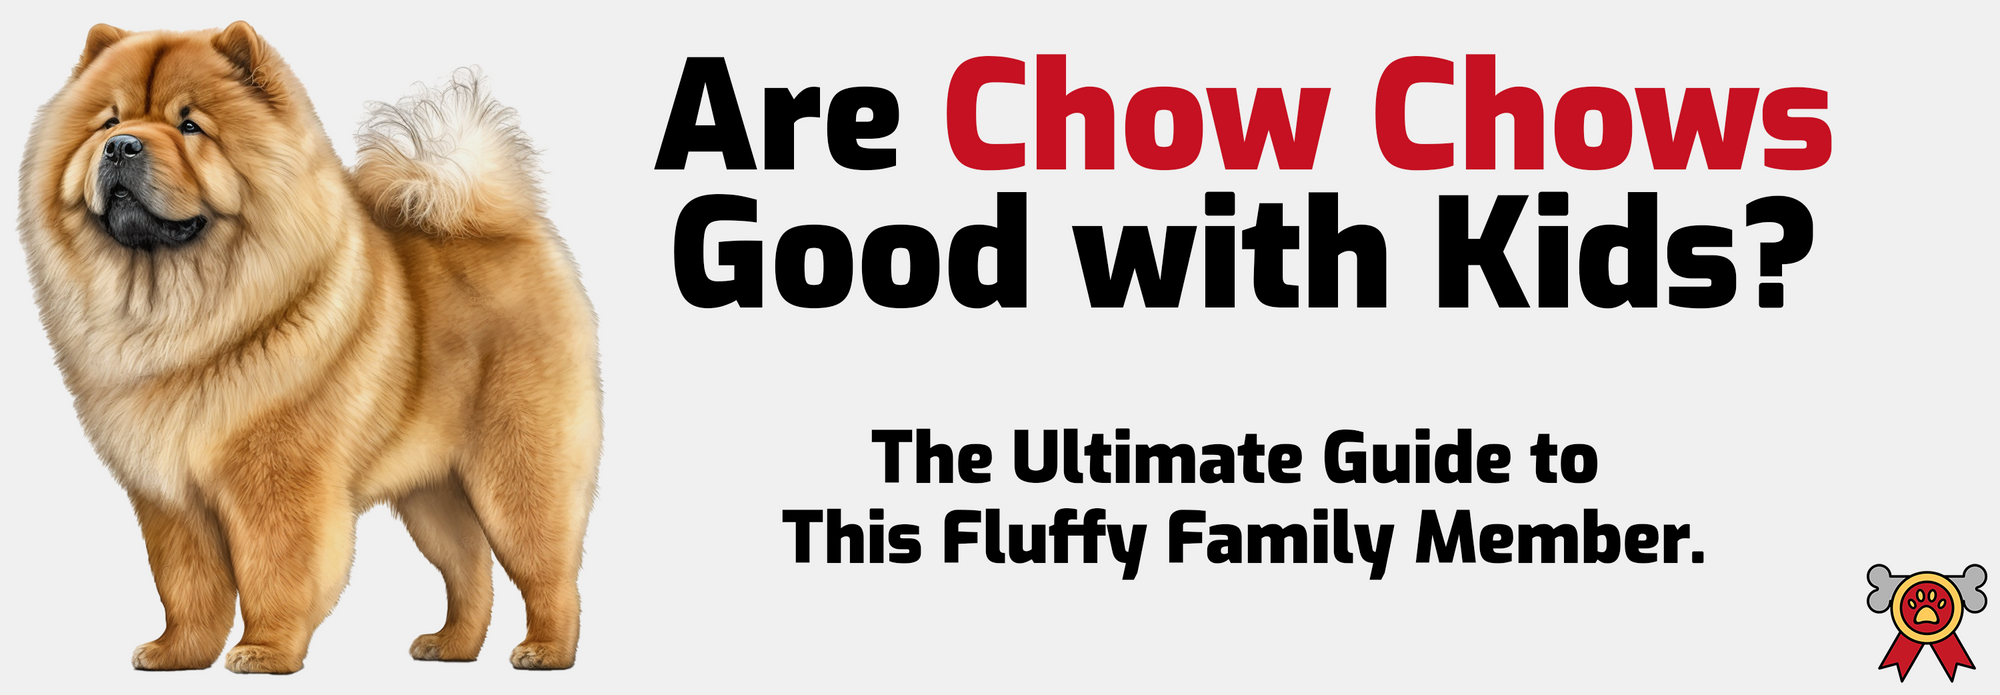 Are Chow Chows Good with Kids? The Ultimate Guide to This Fluffy Family Member